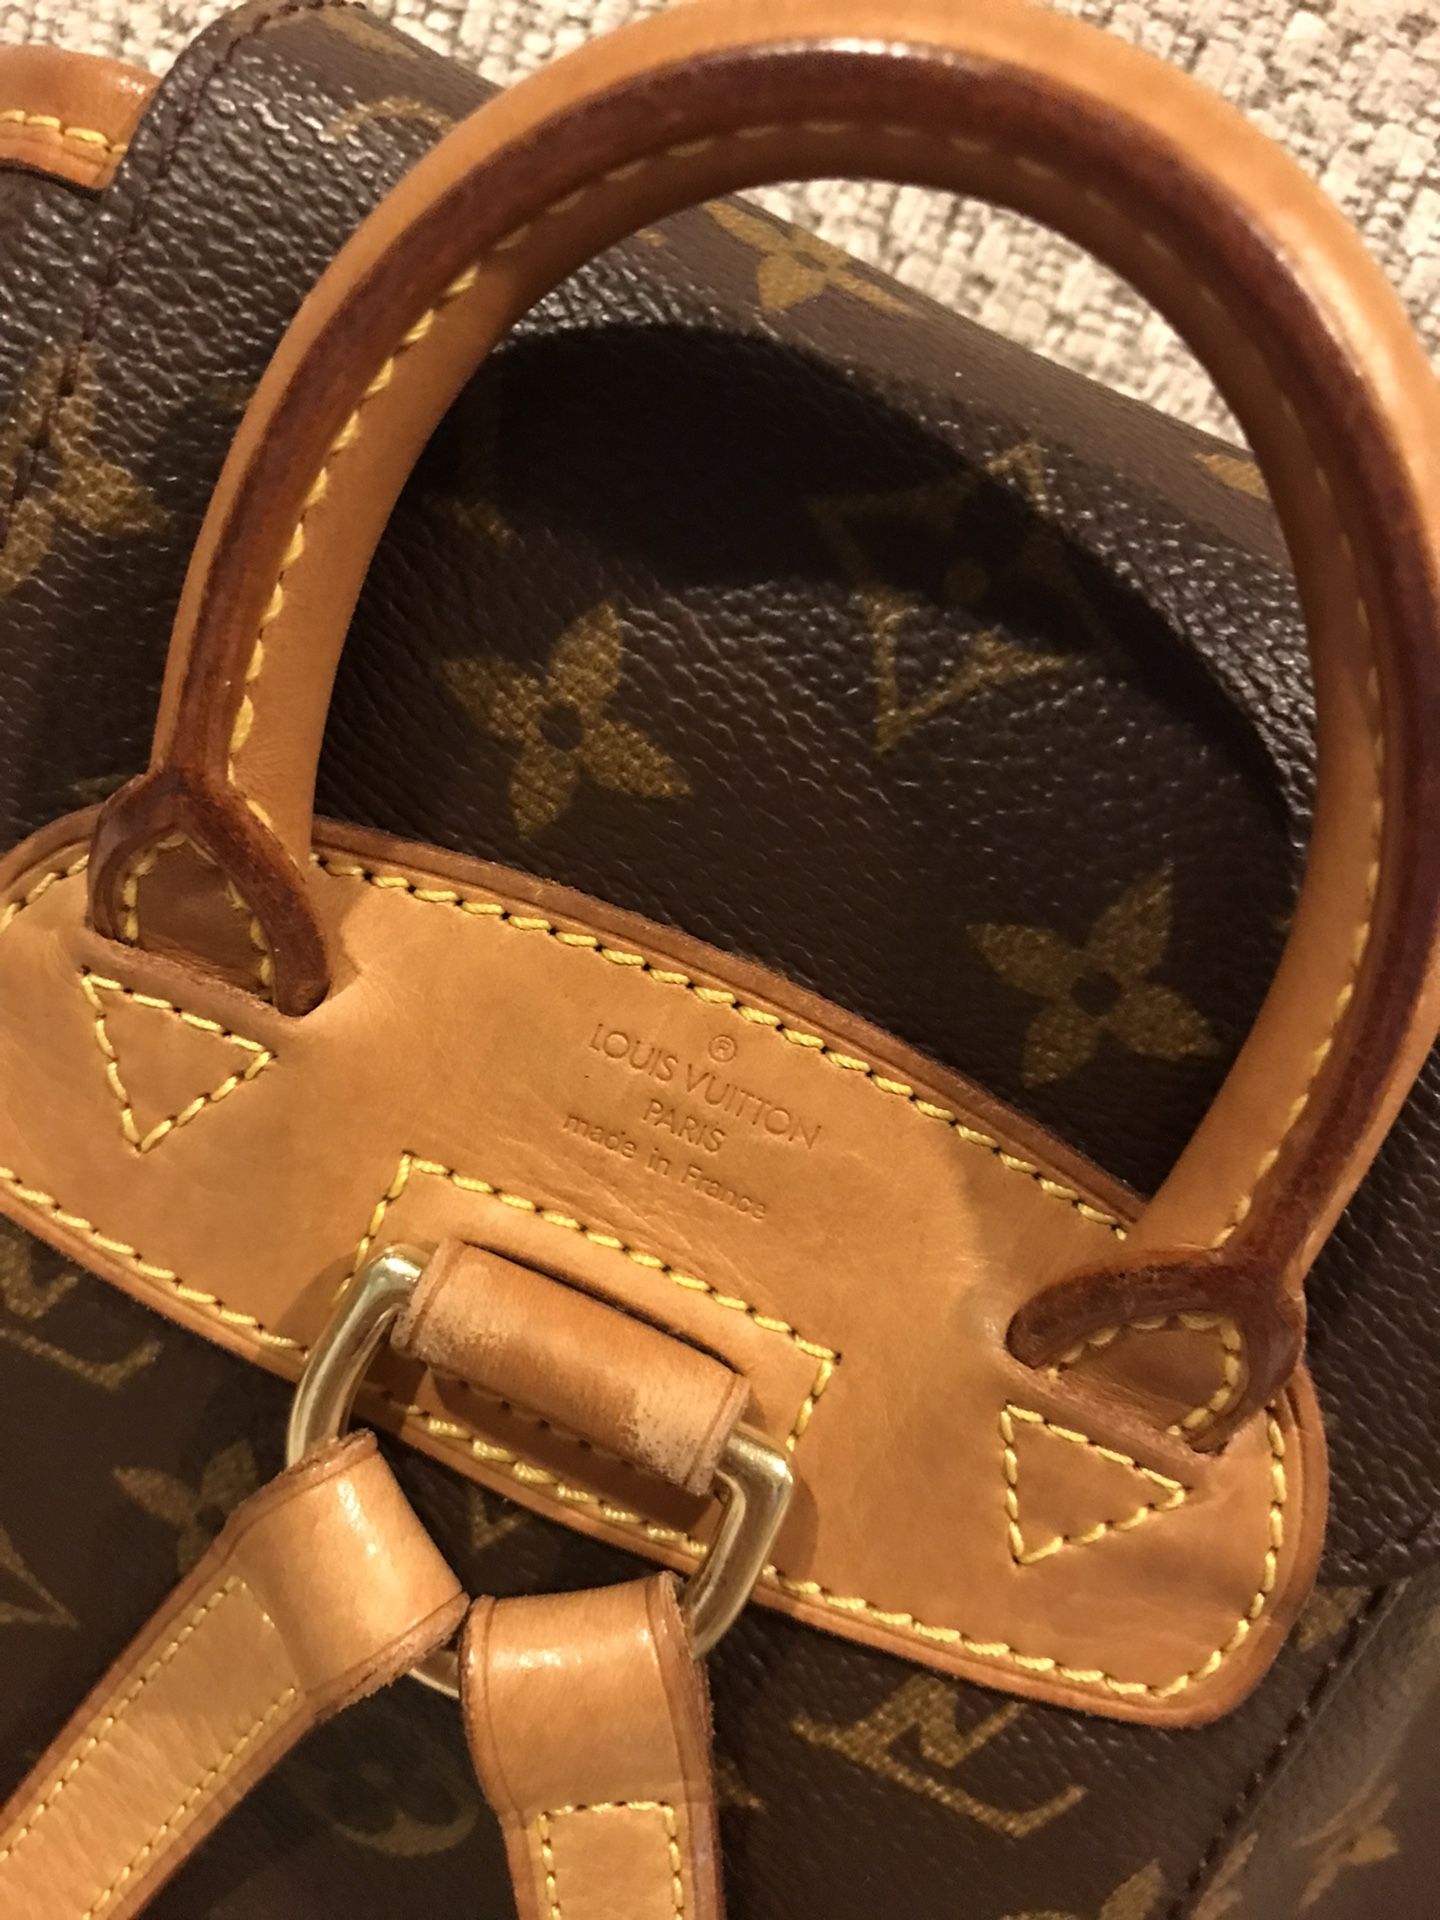 Vintage Louis Vuitton Montsouris Pm Backpack for Sale in Chicago